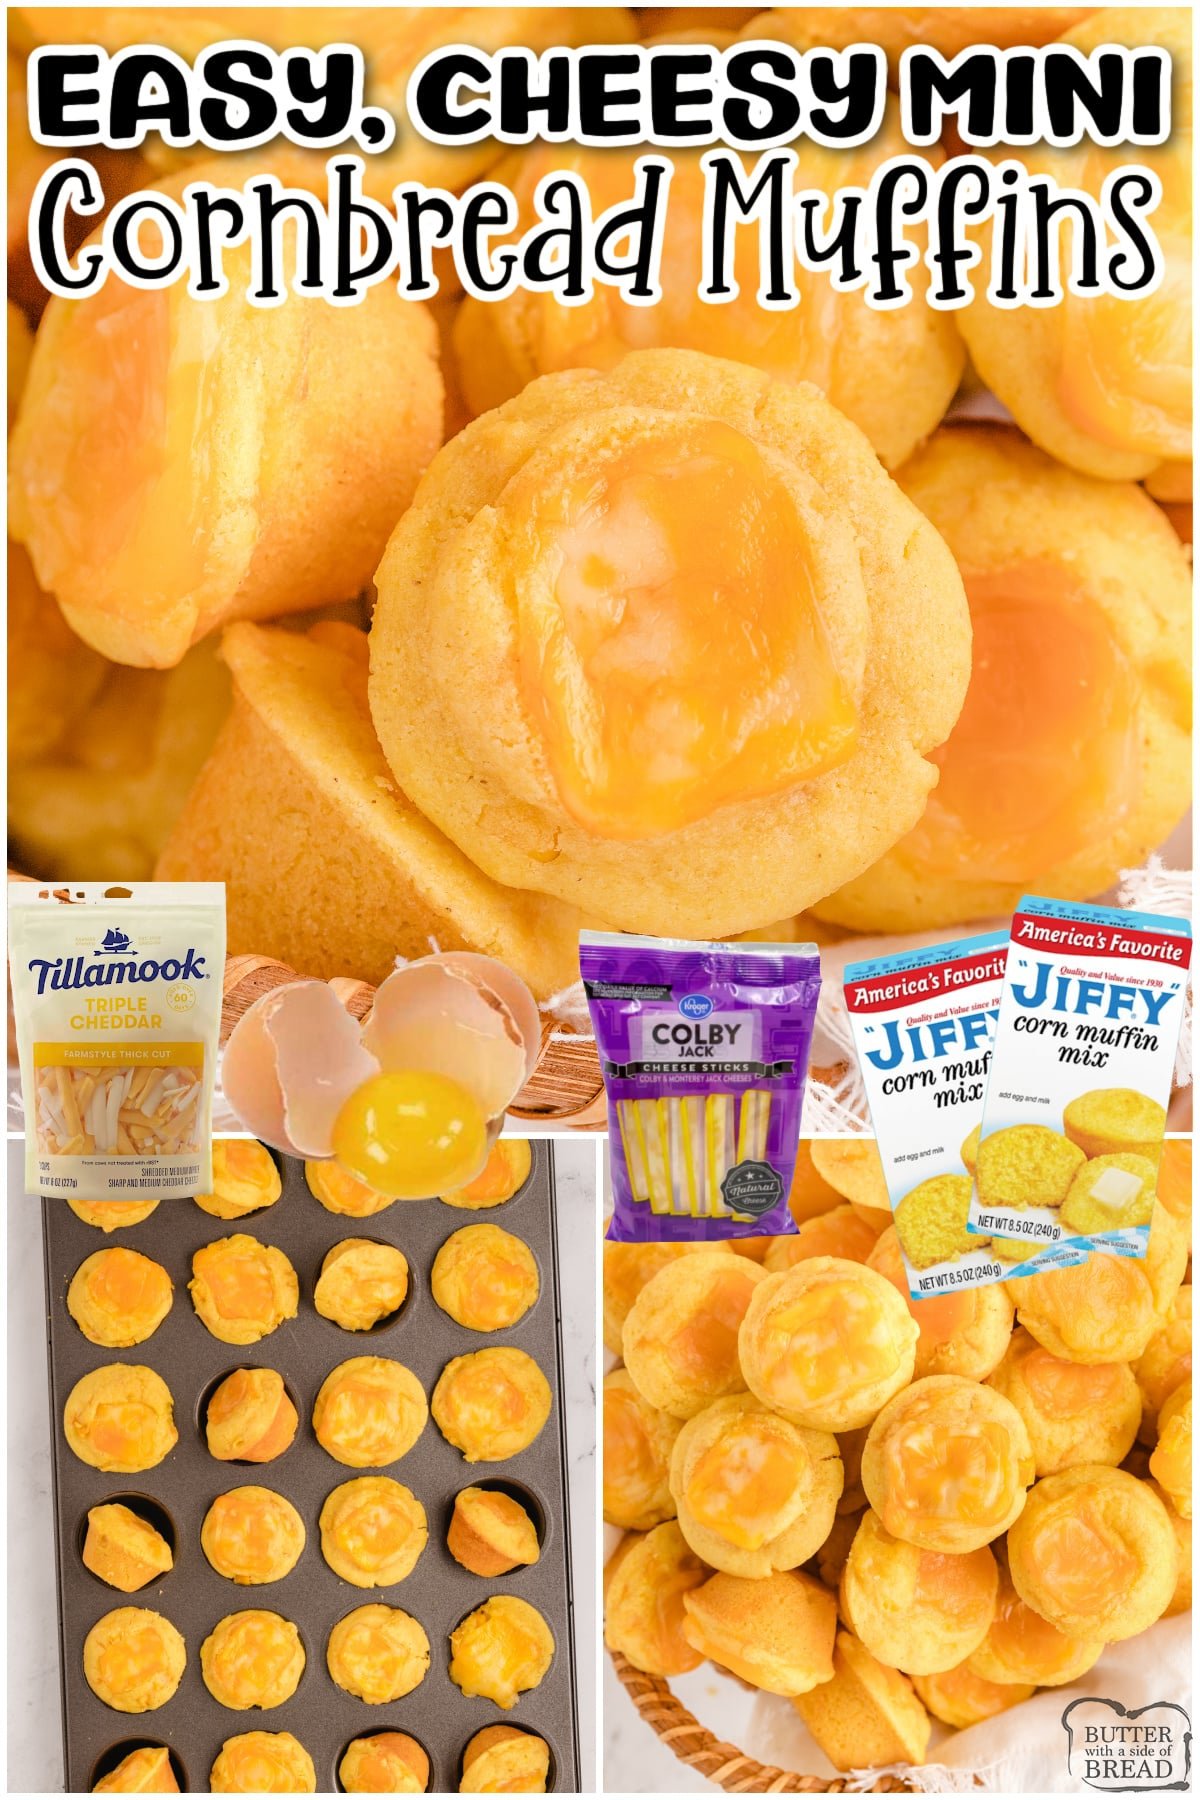 Cheesy Cornbread Muffins are honey cornbread with a cheesy addition! These bite-sized mini muffins easily made with a cornbread mix, canned corn & stuffed with cheese!